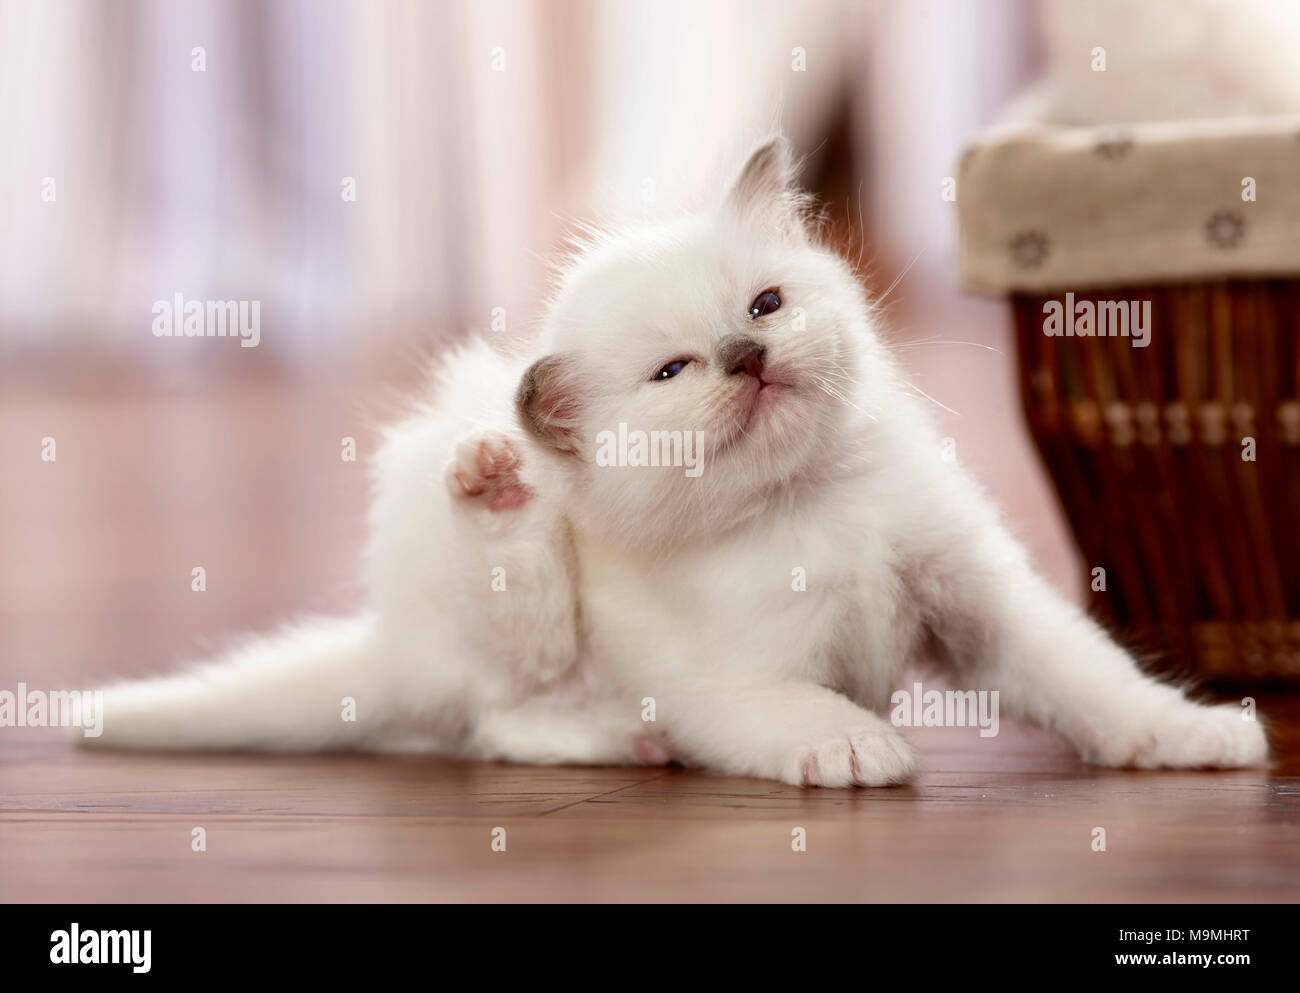 Sacred cat of Burma. Kitten (4 weeks old) scratching its ear with a hind leg. Germany Stock Photo